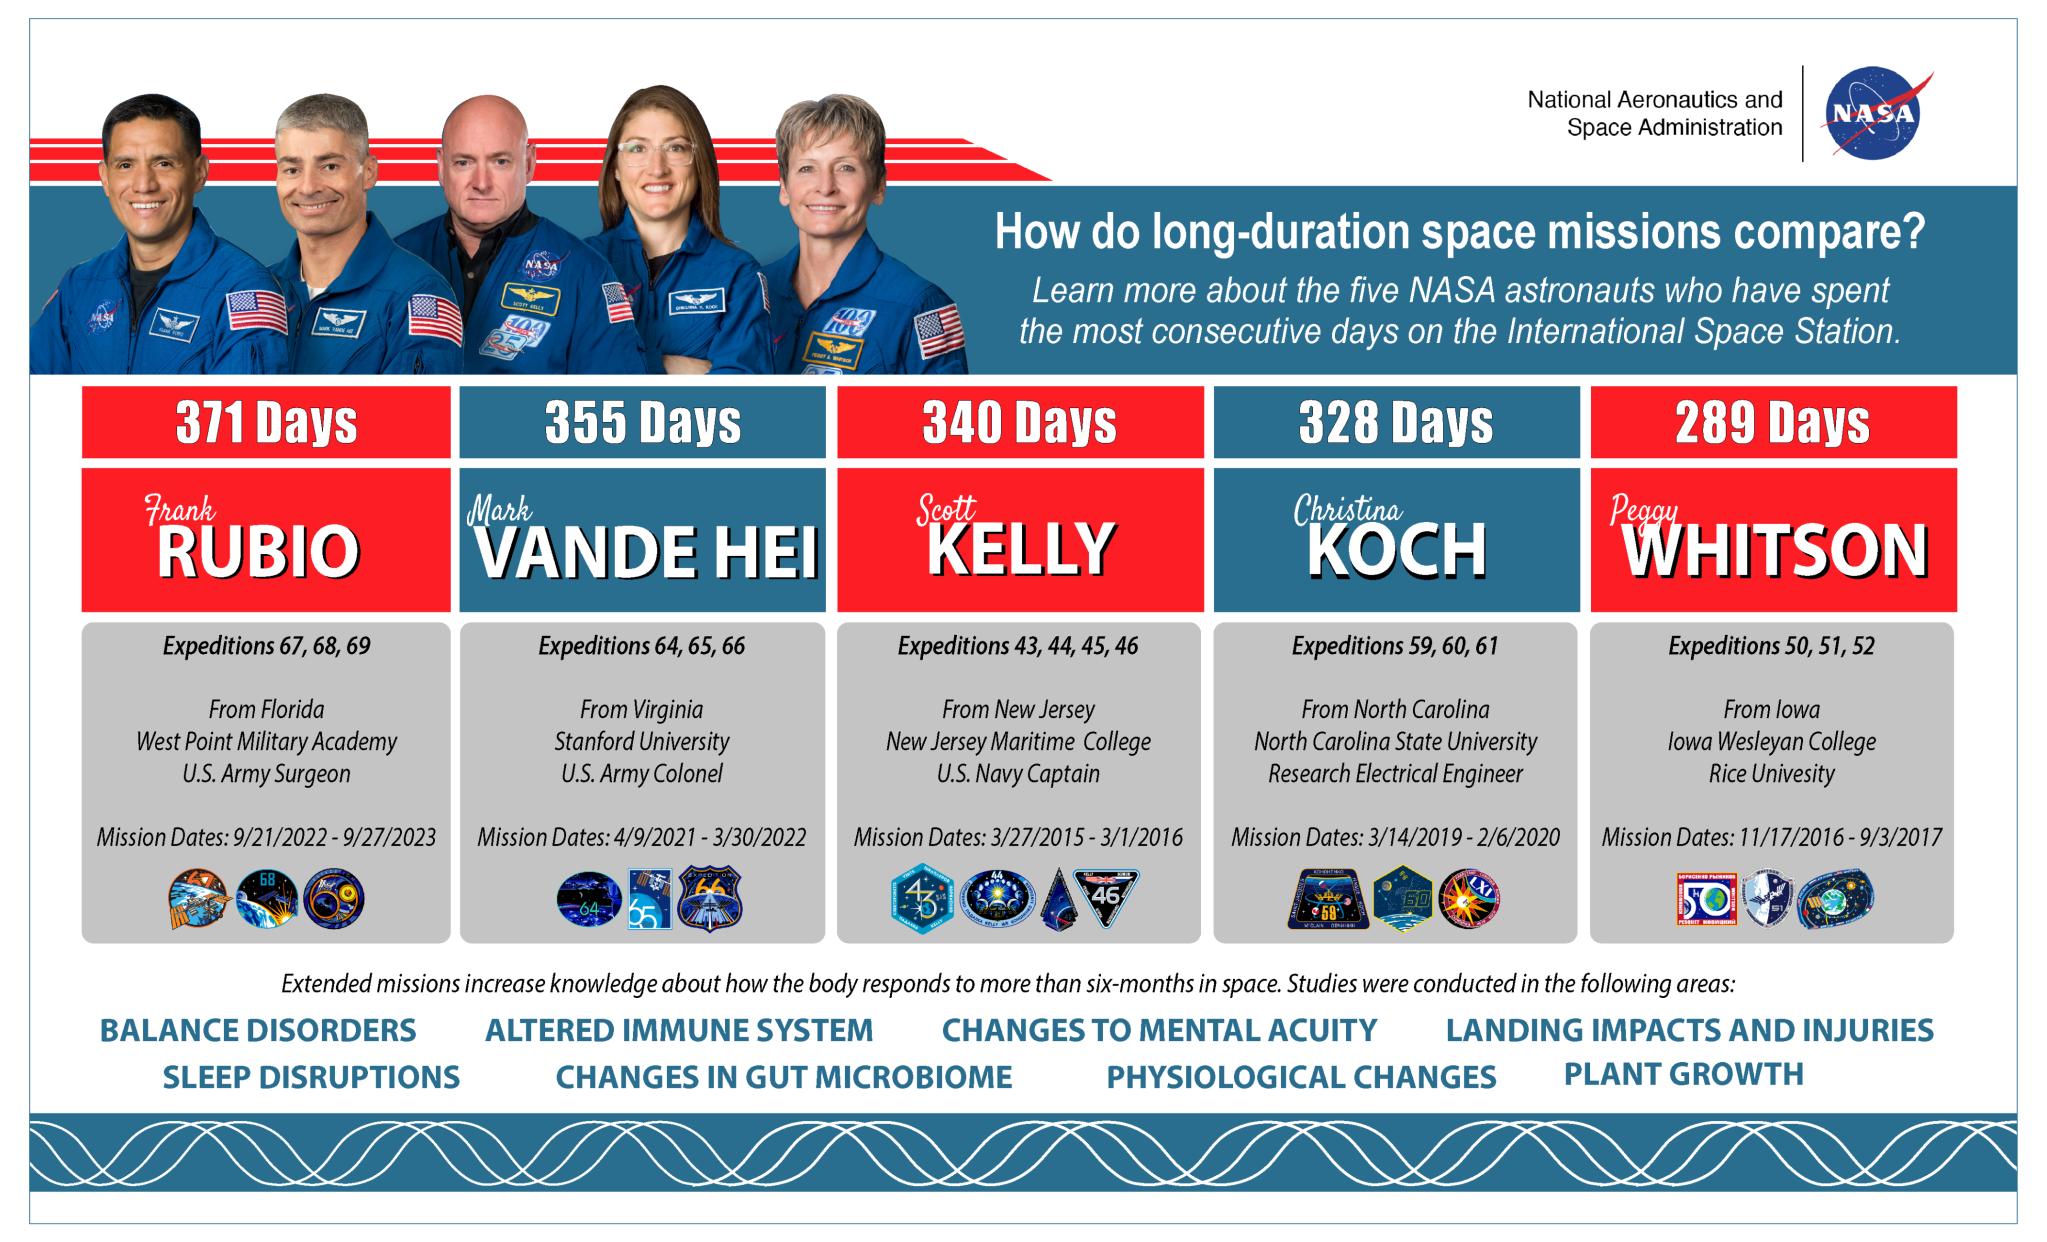 A graphic compiles the top five NASA astronauts that hold the records for longest duration missions in space. From left, Frank Rubio, 371 days; Mark Vande Hei, 355 days; Scott Kelly, 340 days; Christina Koch, 328 days; Peggy Whitson, 289 days. Text on the image reads “how do long-duration space missions compare? Learn about the five NASA astronauts who have spent the most consecutive days on the International Space Station.” Additional information includes the astronauts’ Expedition missions, mission dates, and information on where they are from and where they went to school.